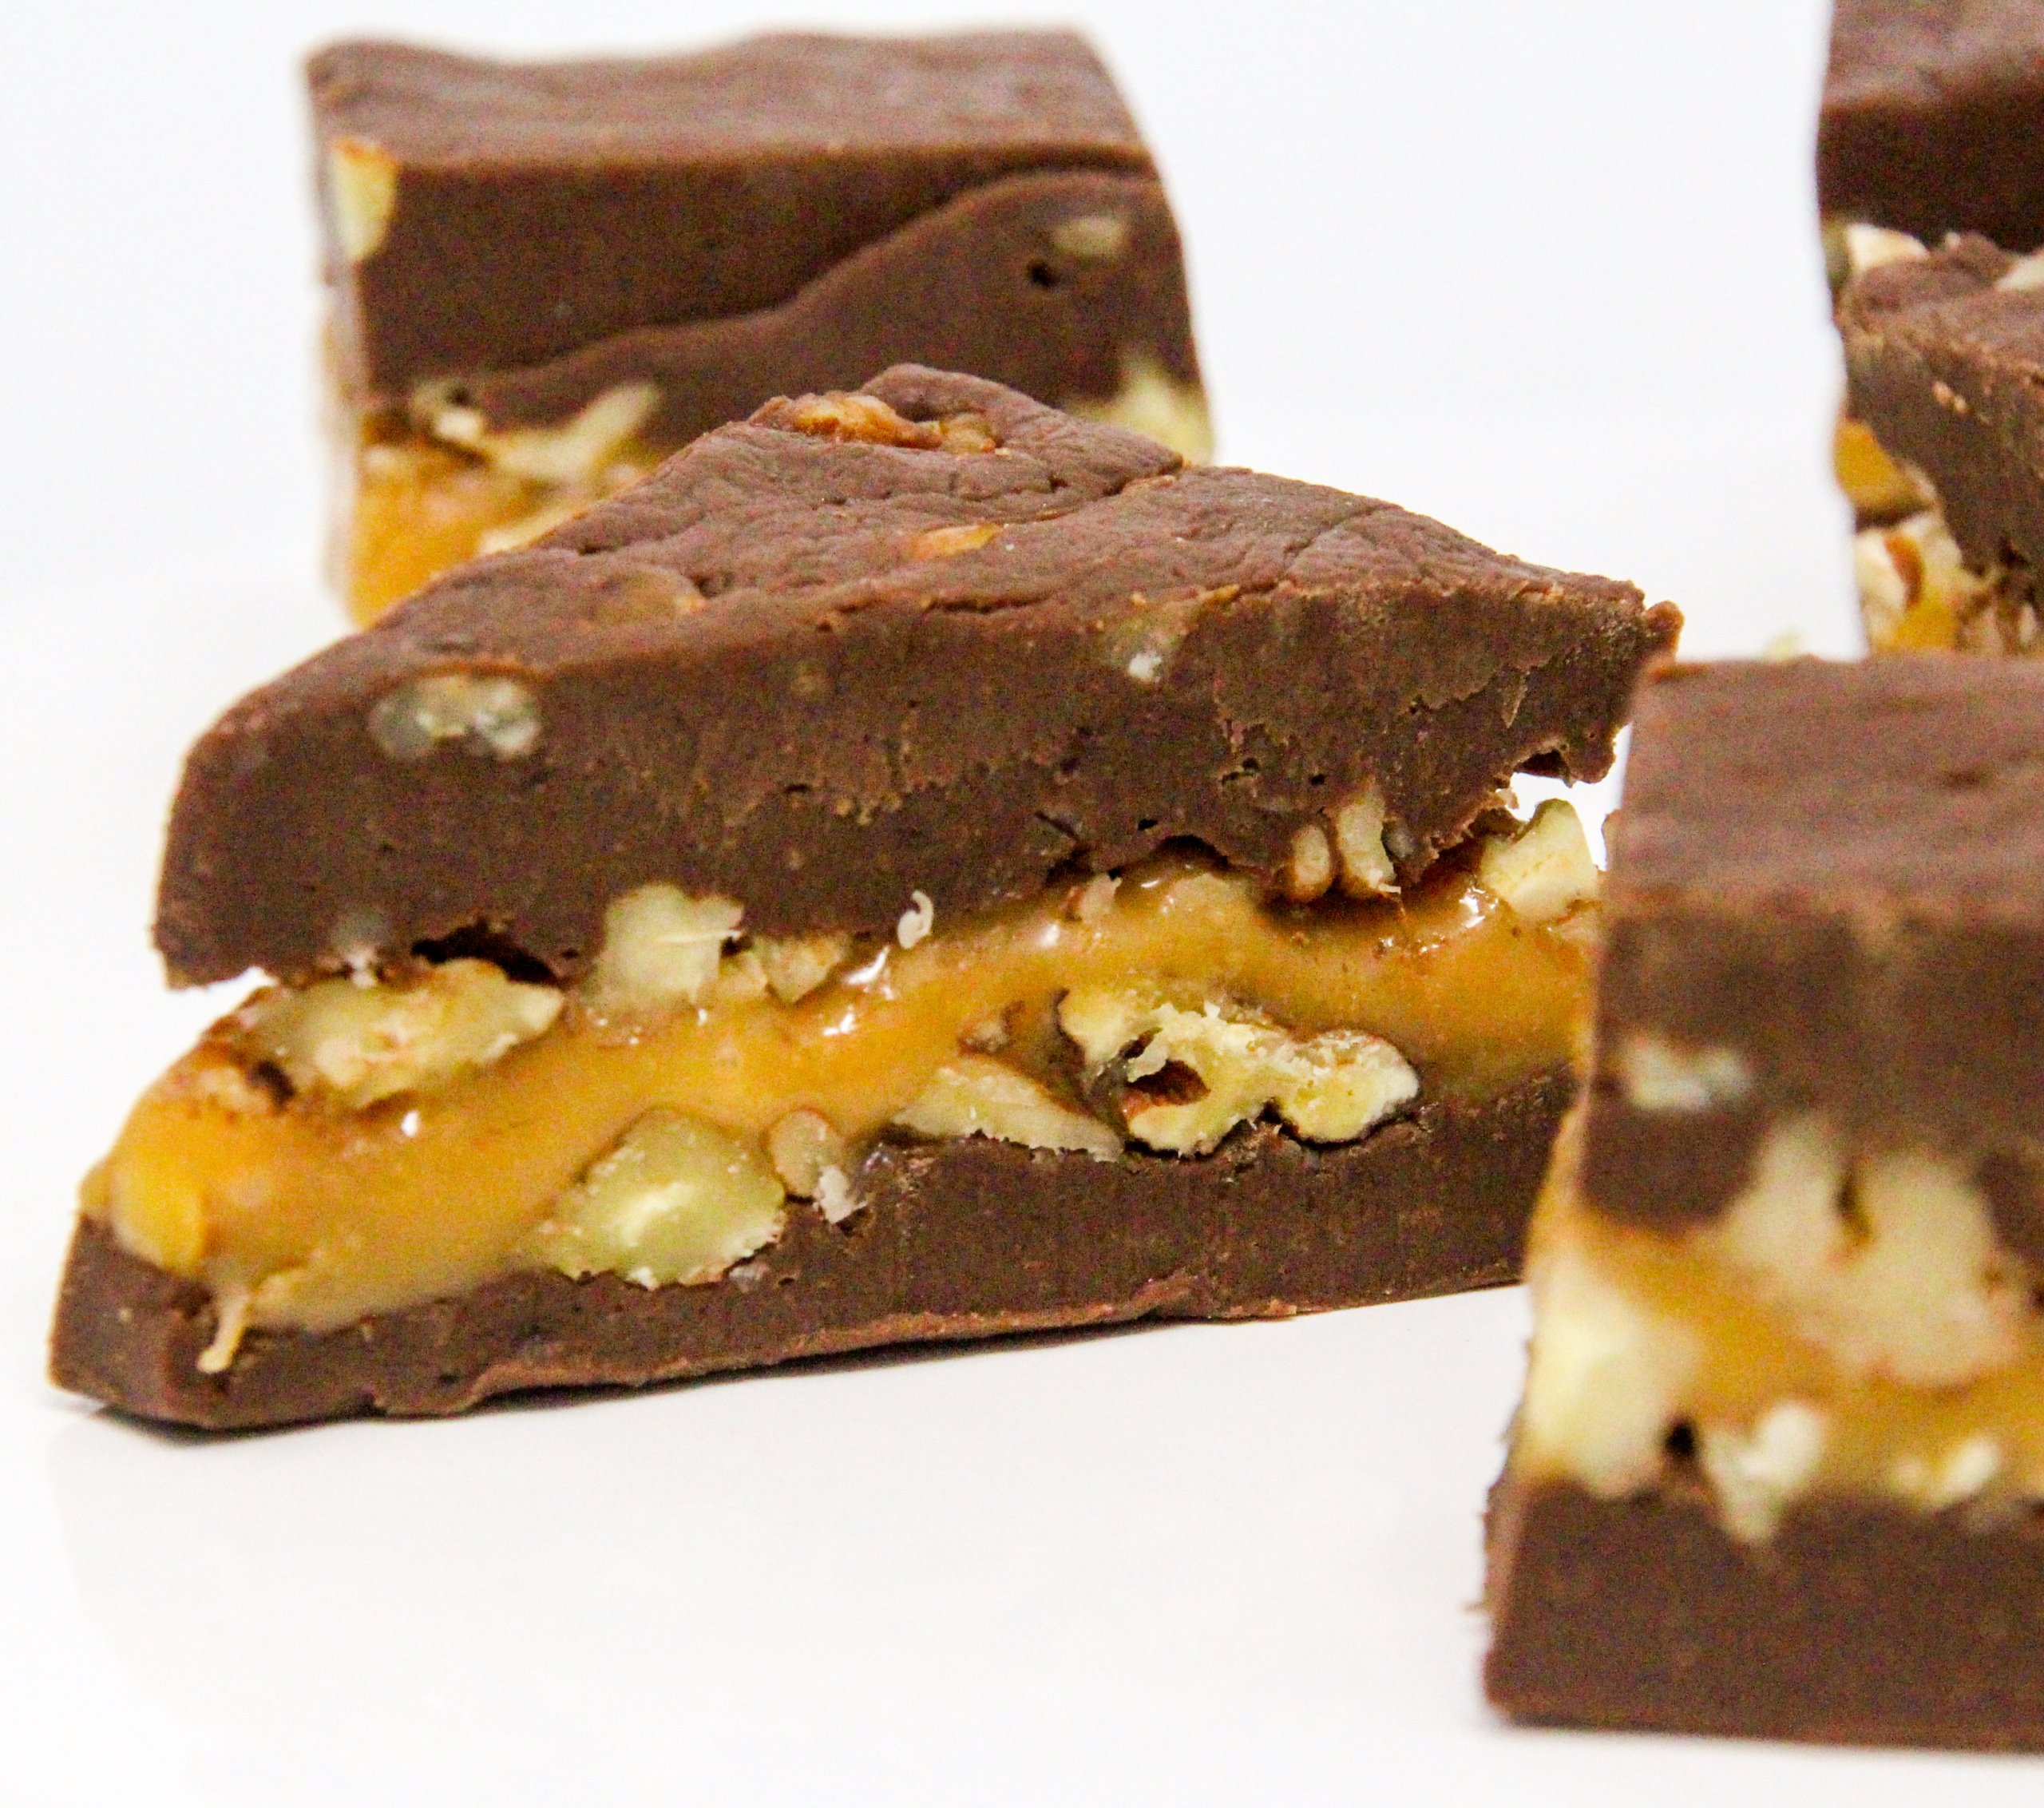 Turtle Fudge utilizes pantry-stable items like caramel pieces, chocolate chips, and sweetened condensed milk yet the resulting treat is candy shop worthy! Recipe shared with permission granted by Nancy Coco, author of A Midsummer Night's Fudge. 